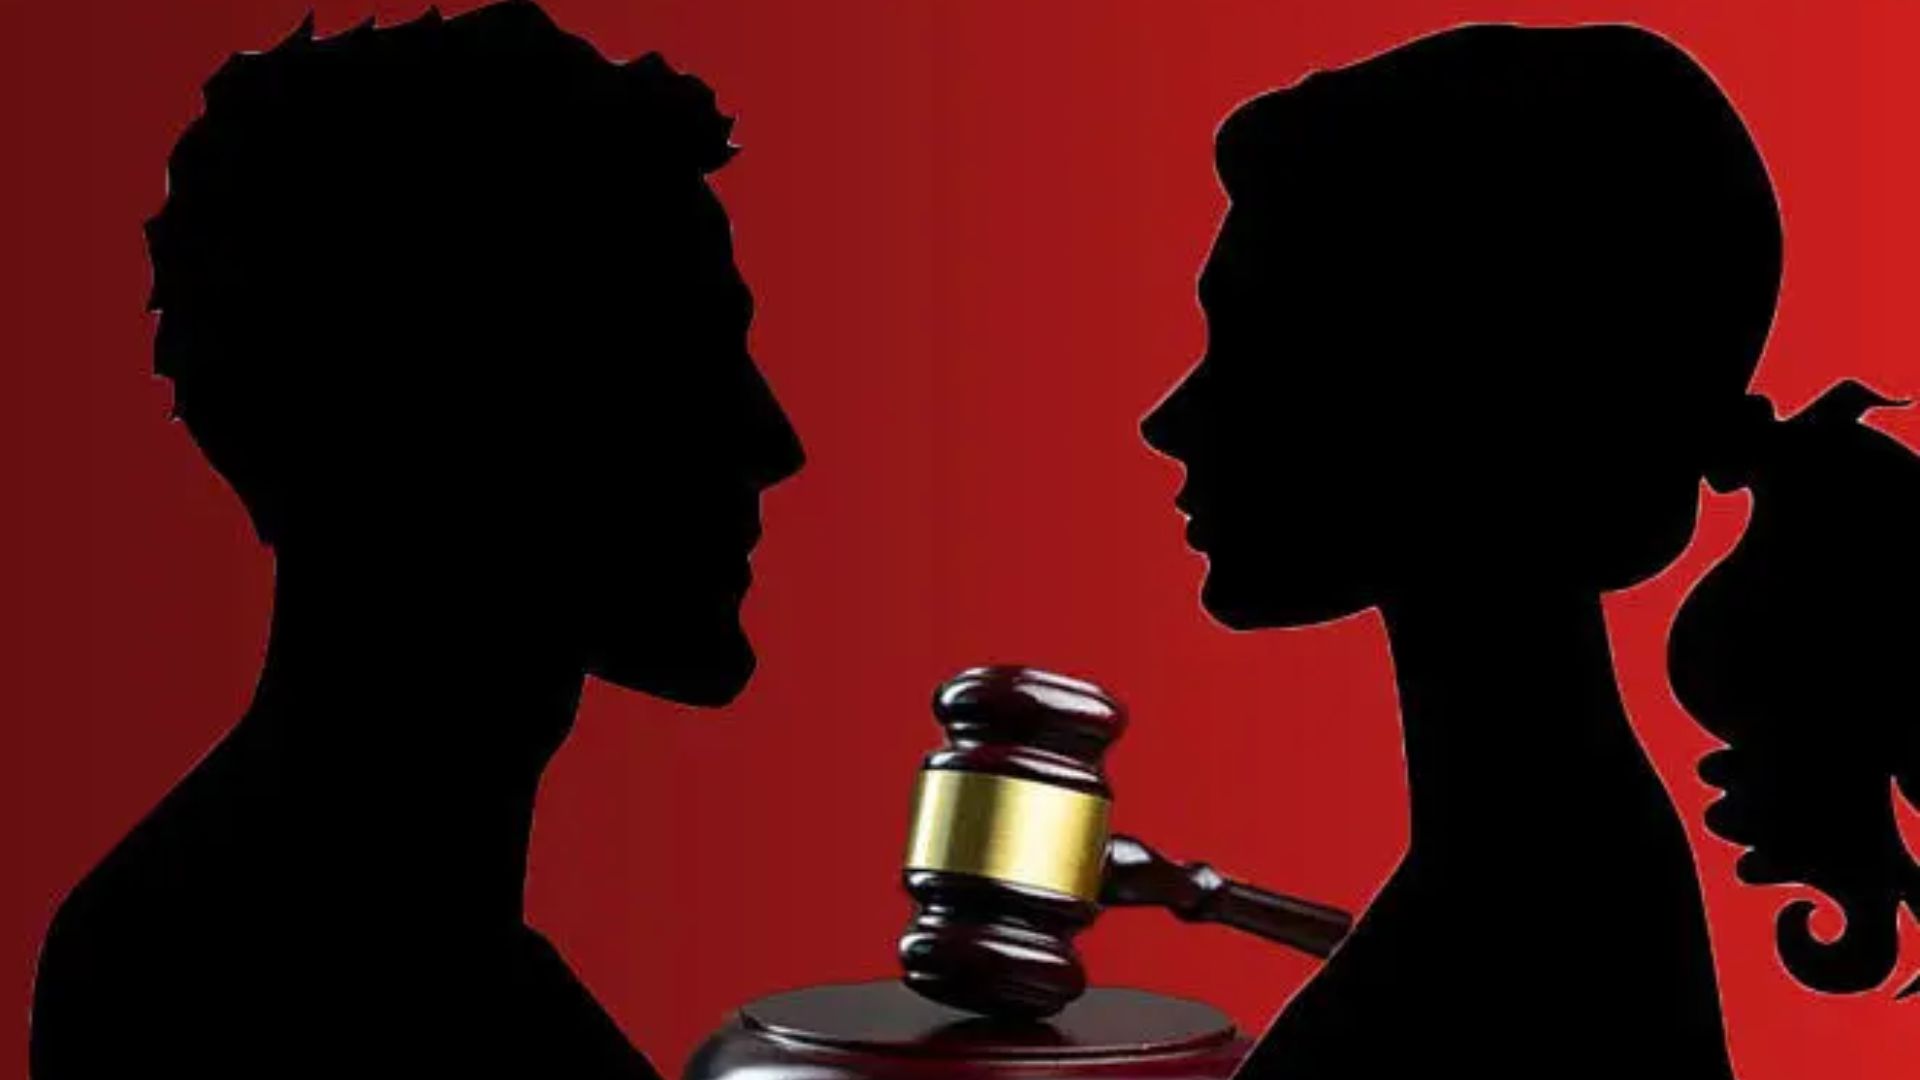 Maintenance Awarded To Wife Is Not a Blanket Liability And Can Be Altered Subject To Change In Circumstances: Delhi HC